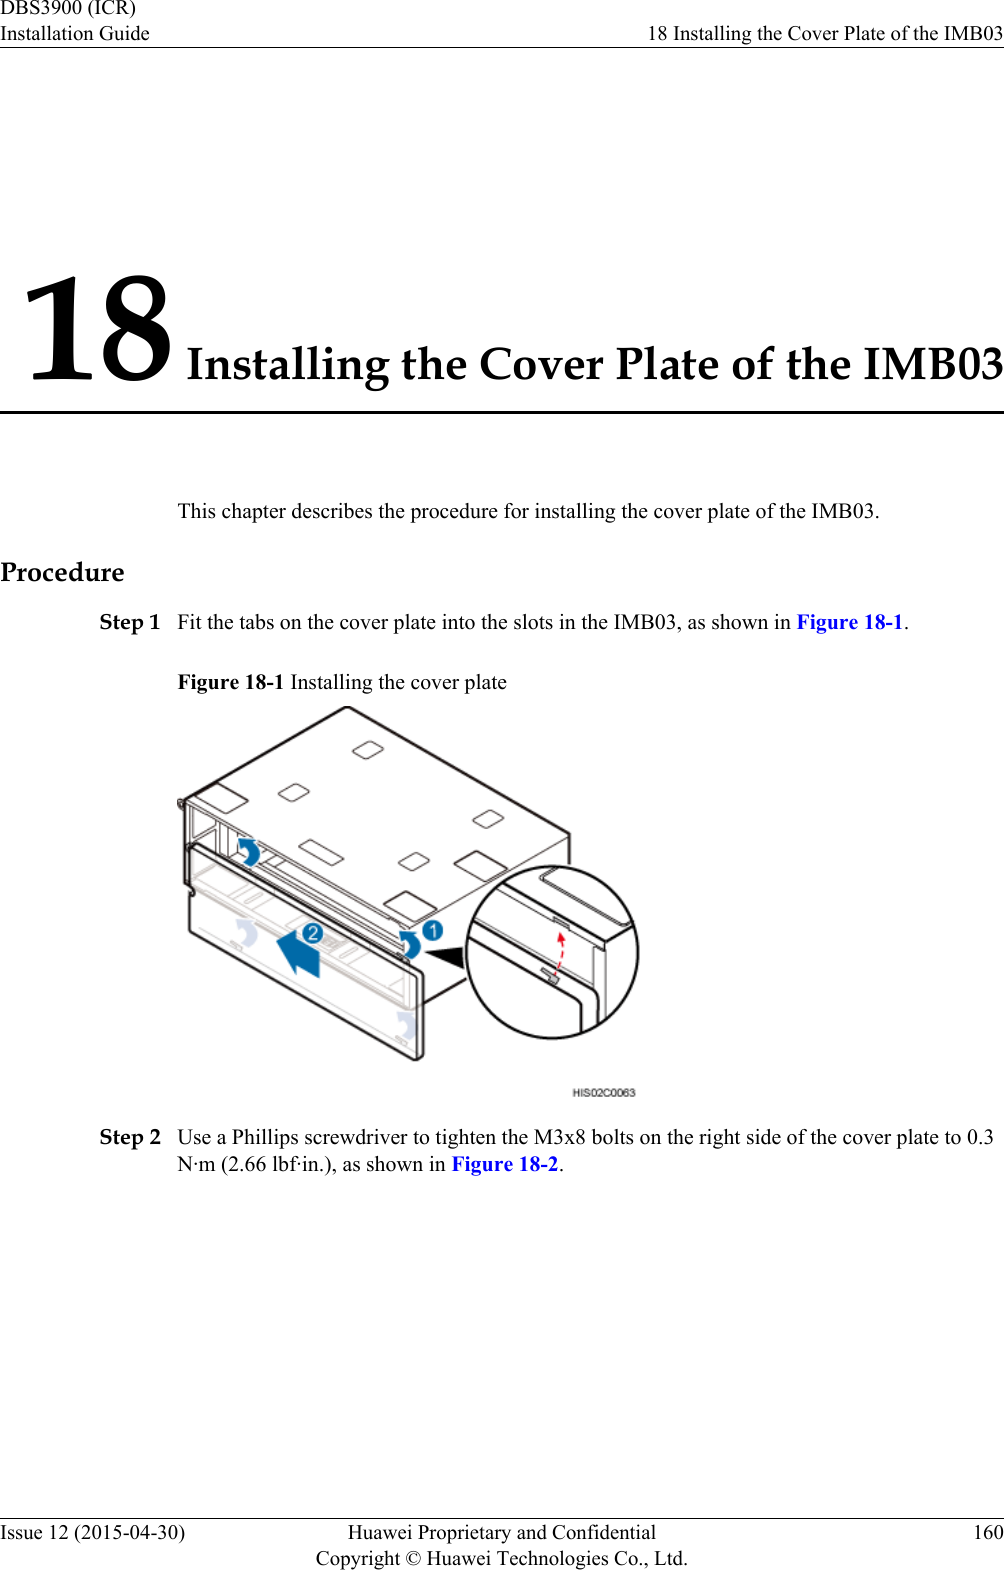 18 Installing the Cover Plate of the IMB03This chapter describes the procedure for installing the cover plate of the IMB03.ProcedureStep 1 Fit the tabs on the cover plate into the slots in the IMB03, as shown in Figure 18-1.Figure 18-1 Installing the cover plateStep 2 Use a Phillips screwdriver to tighten the M3x8 bolts on the right side of the cover plate to 0.3N·m (2.66 lbf·in.), as shown in Figure 18-2.DBS3900 (ICR)Installation Guide 18 Installing the Cover Plate of the IMB03Issue 12 (2015-04-30) Huawei Proprietary and ConfidentialCopyright © Huawei Technologies Co., Ltd.160